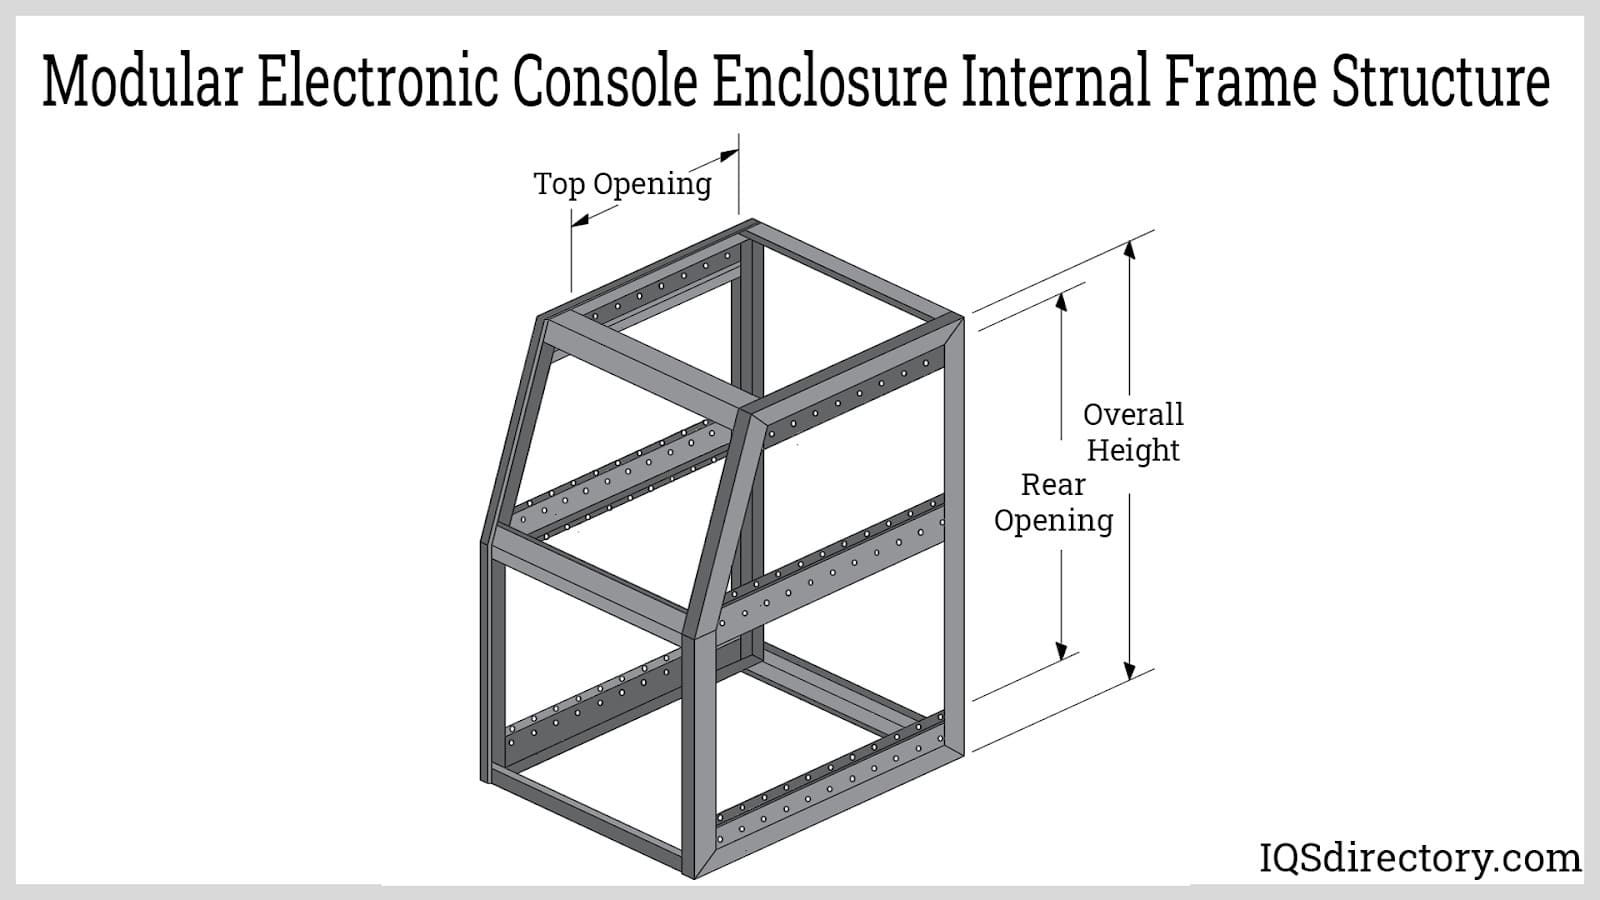 Modular Electronic Console Enclosure Internal Frame Structure